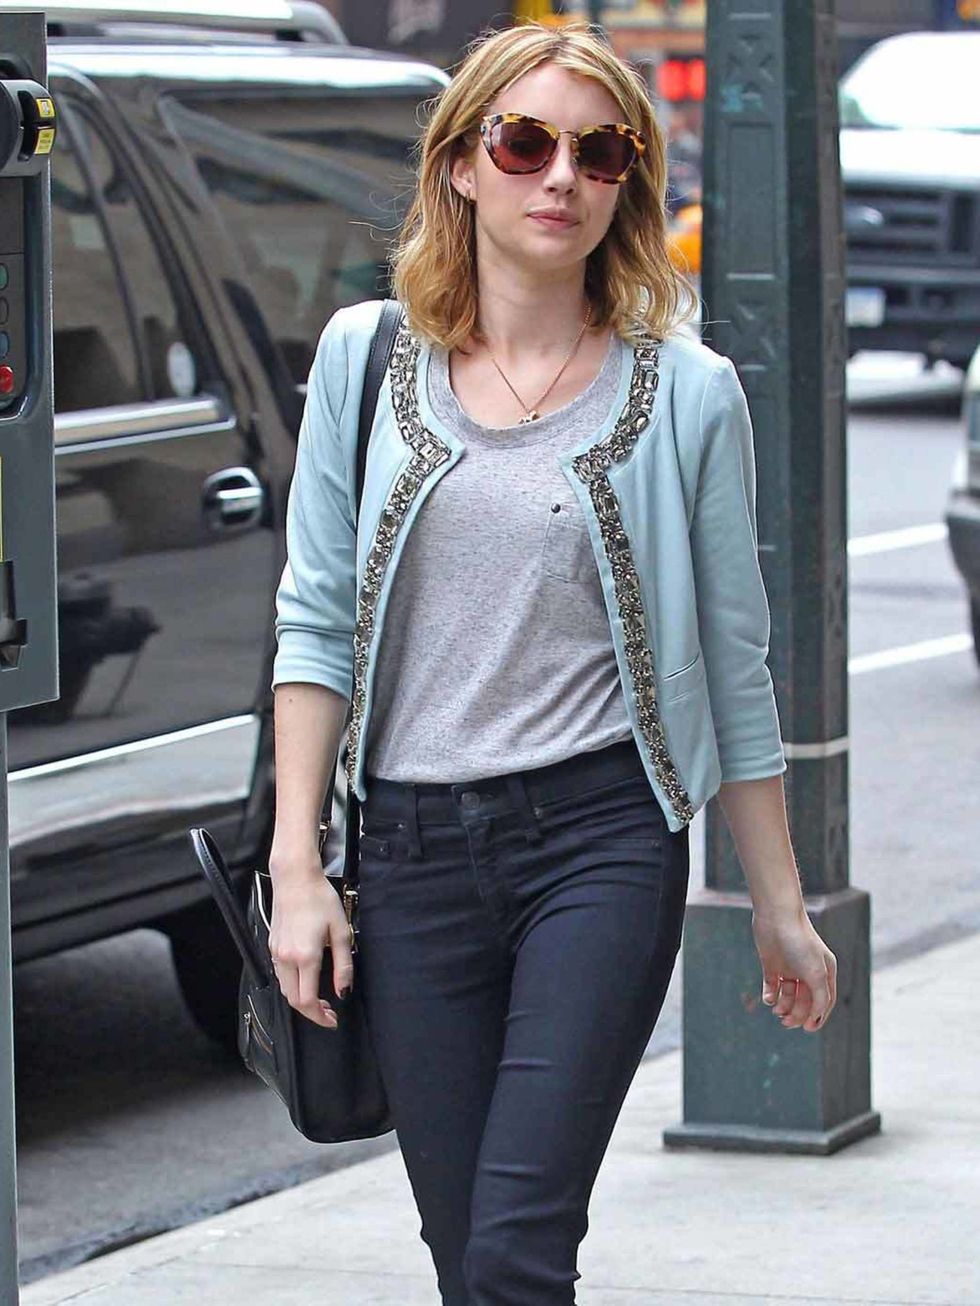 <p><a href="http://www.elleuk.com/star-style/celebrity-style-files/emma-roberts">Emma Roberts</a> wearing an embellished ASOS jacket while out in New York</p>